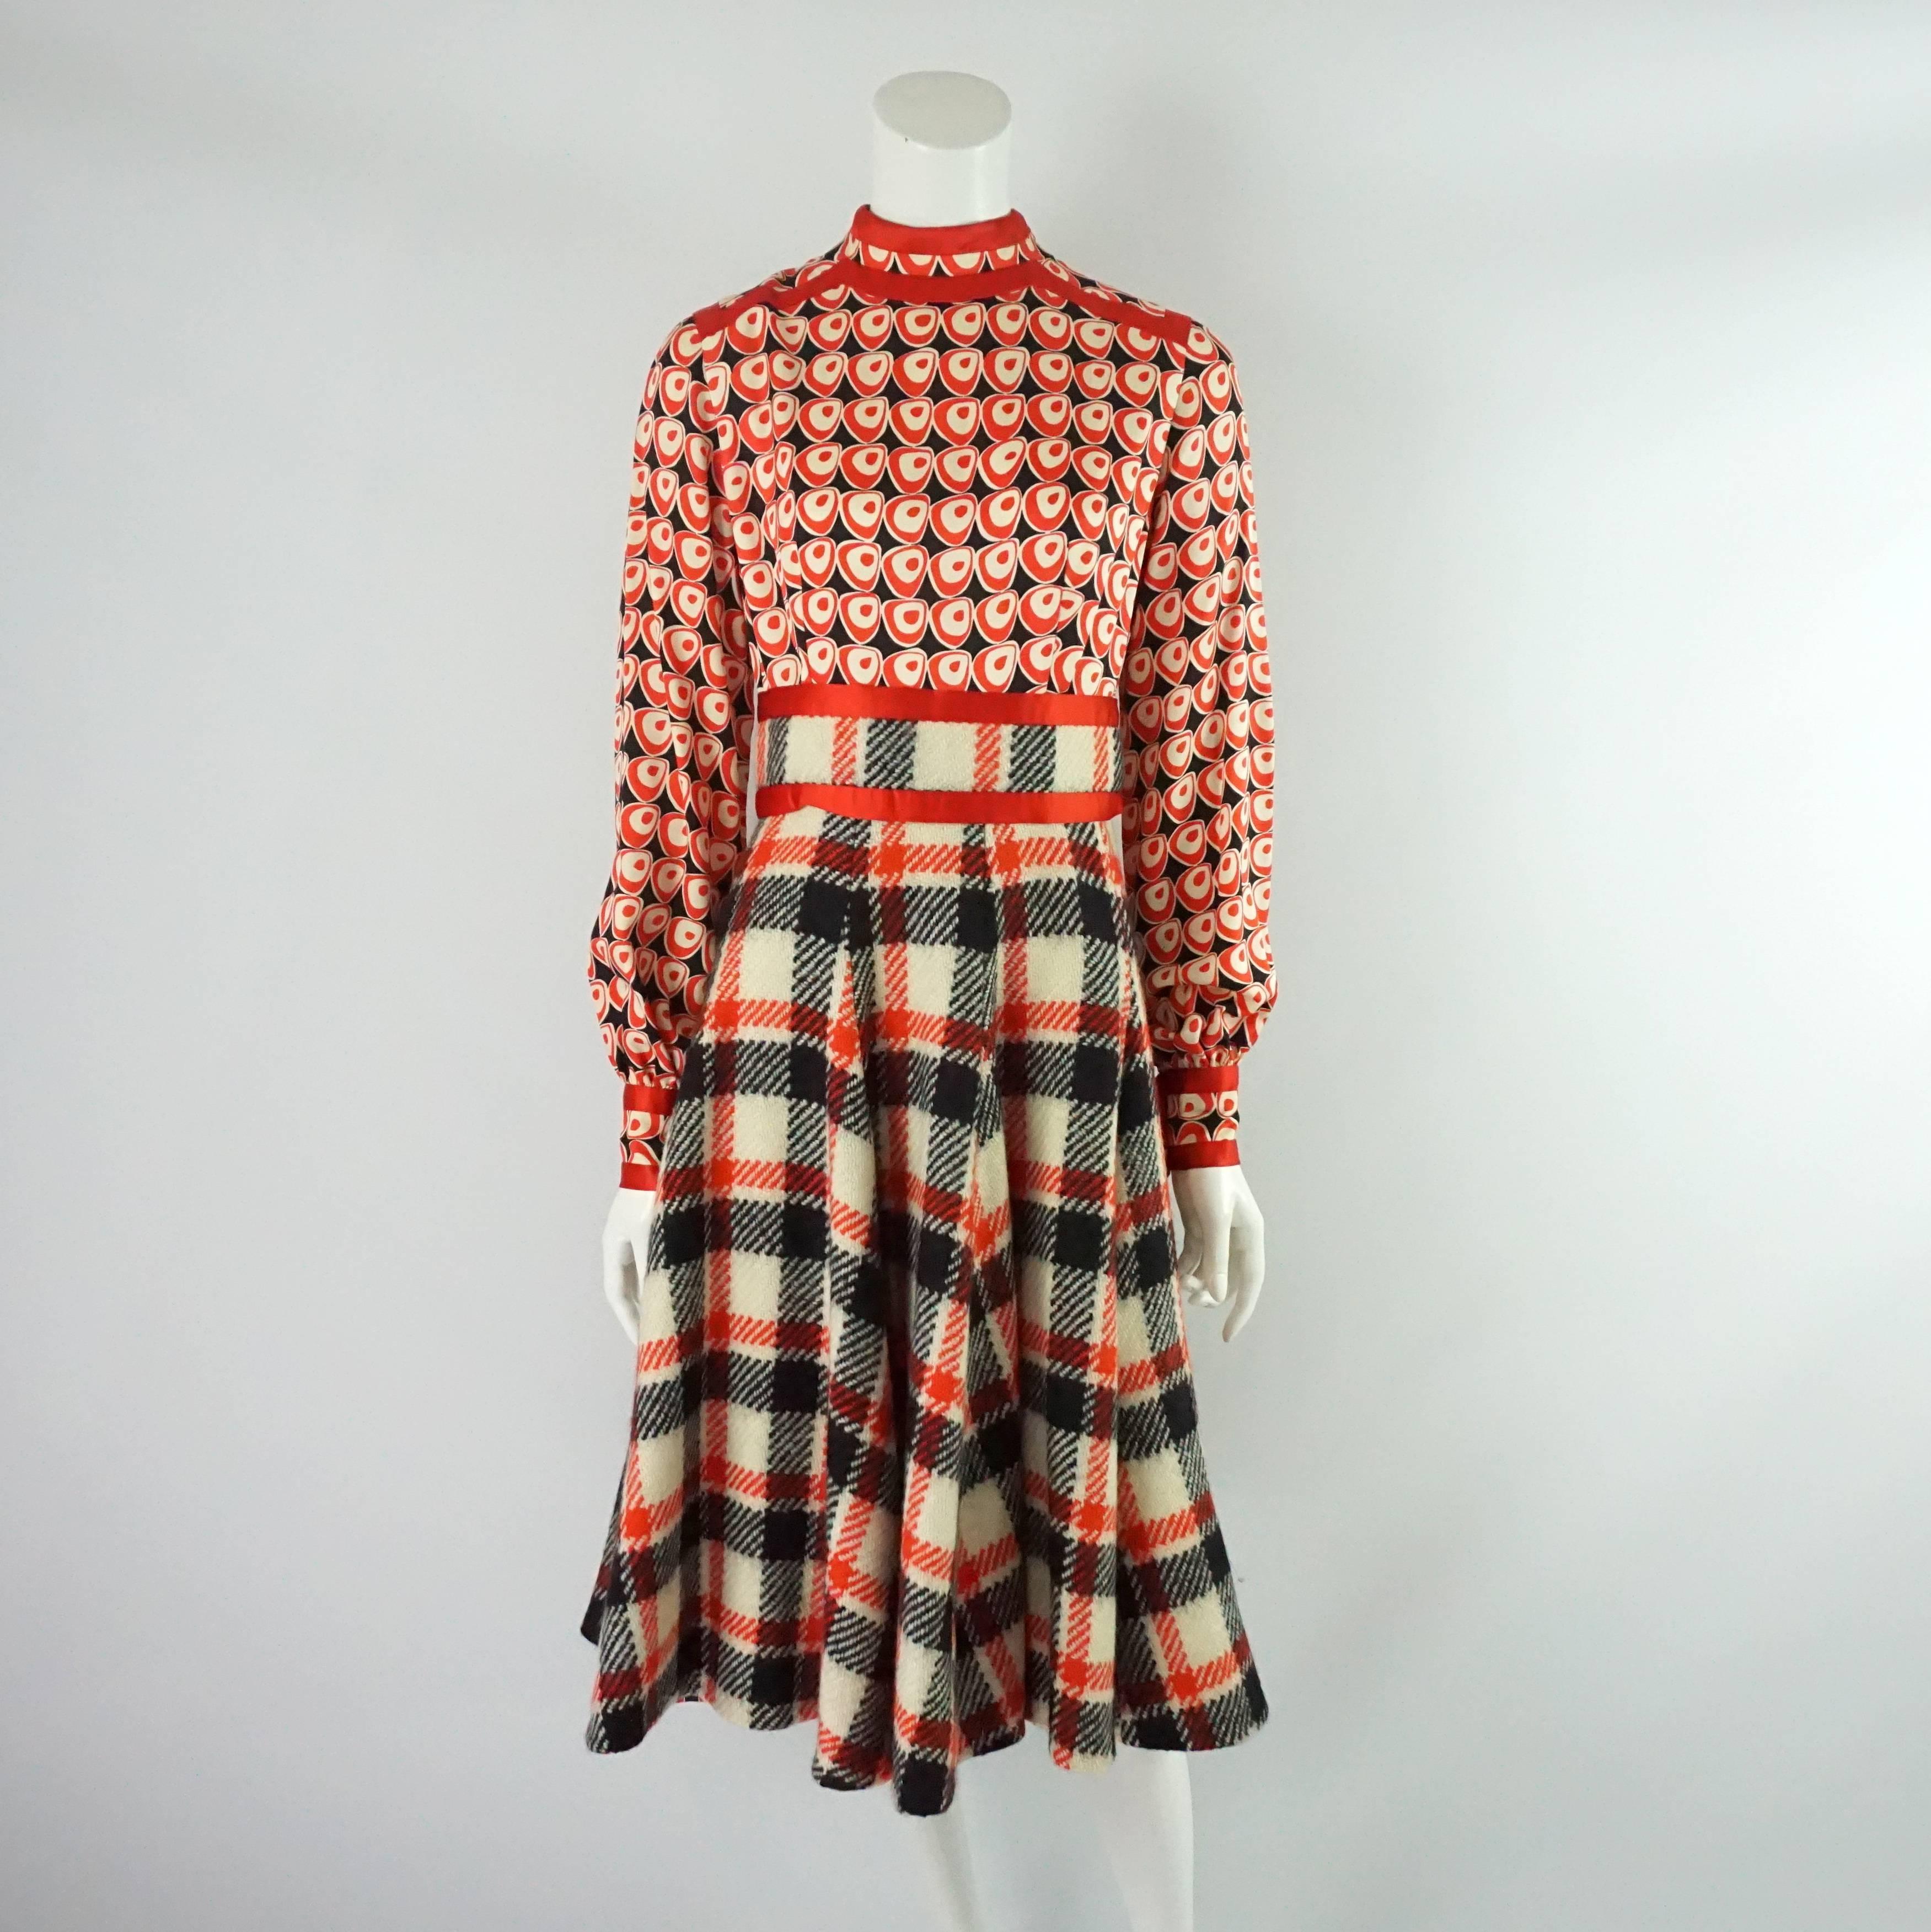 This classic yet funky Ronald Amey set comes with a long sleeve dress and jacket. The dress' bodice is a silk geometric print with a wool plaid skirt and red silk trim; it also has pockets in the front. The jacket is also a plaid wool with the red